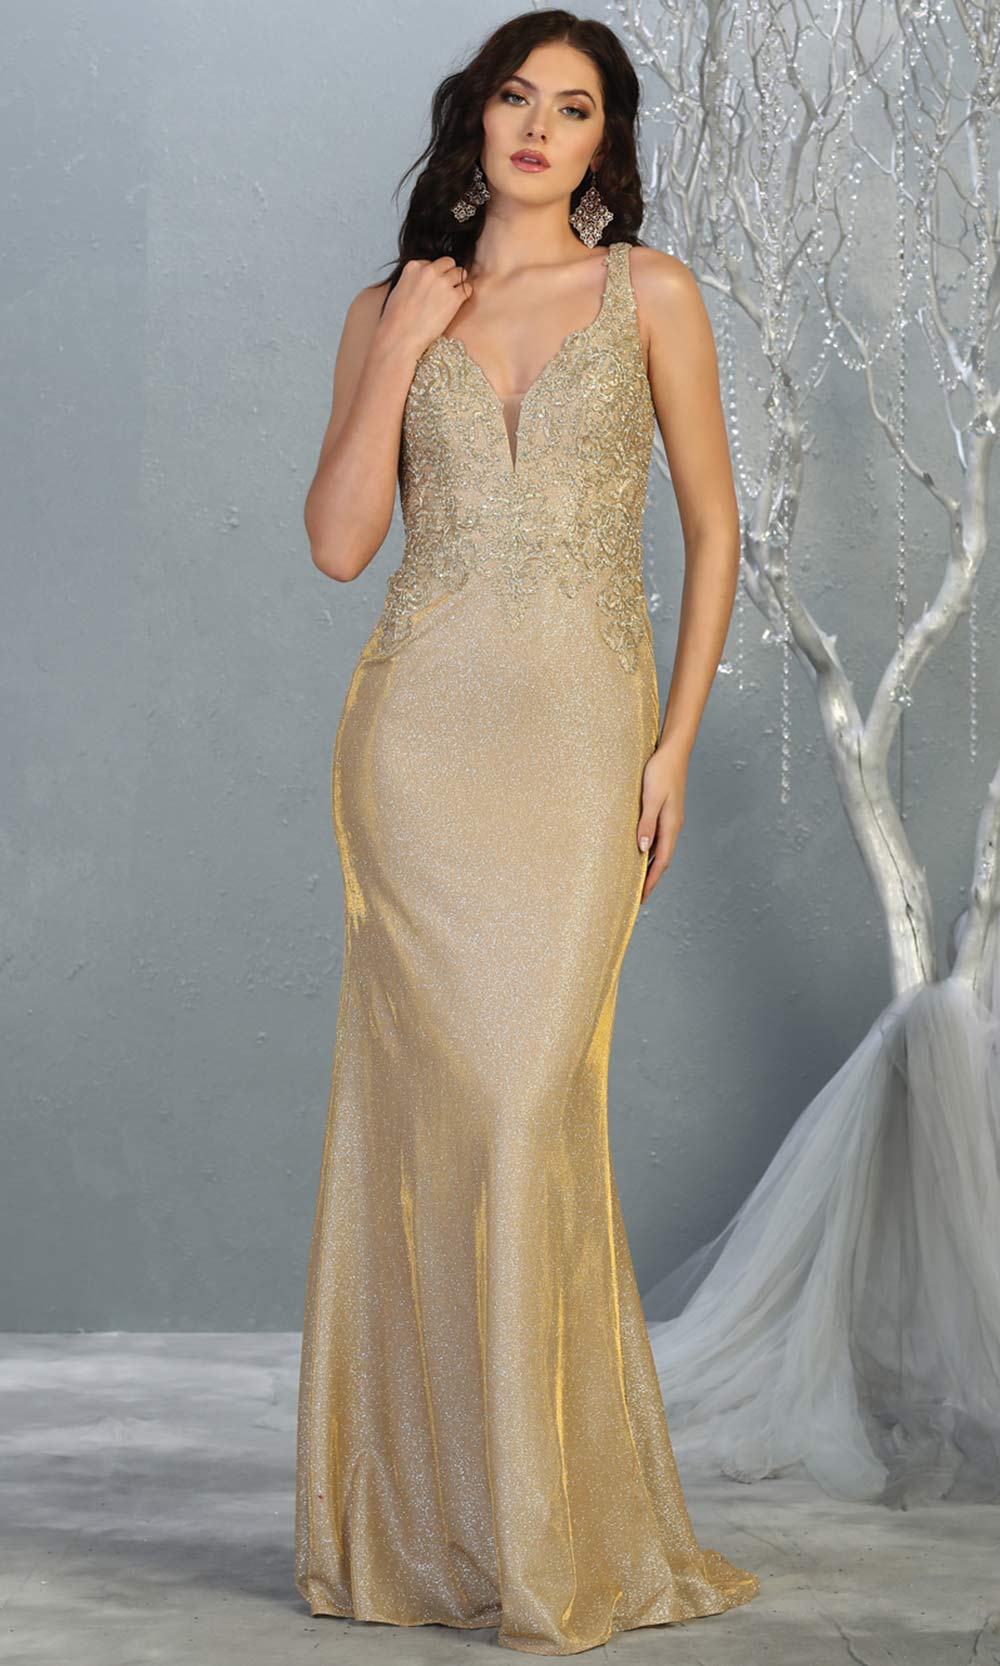 Mayqueen MQ 1744 long gold v neck beaded top evening fitted metallic dress w/low back. Full length gold gown is perfect for enagagement/e-shoot dress, wedding reception dress, indowestern gown, formal evening party dress, prom. Plus sizes avail.jpg